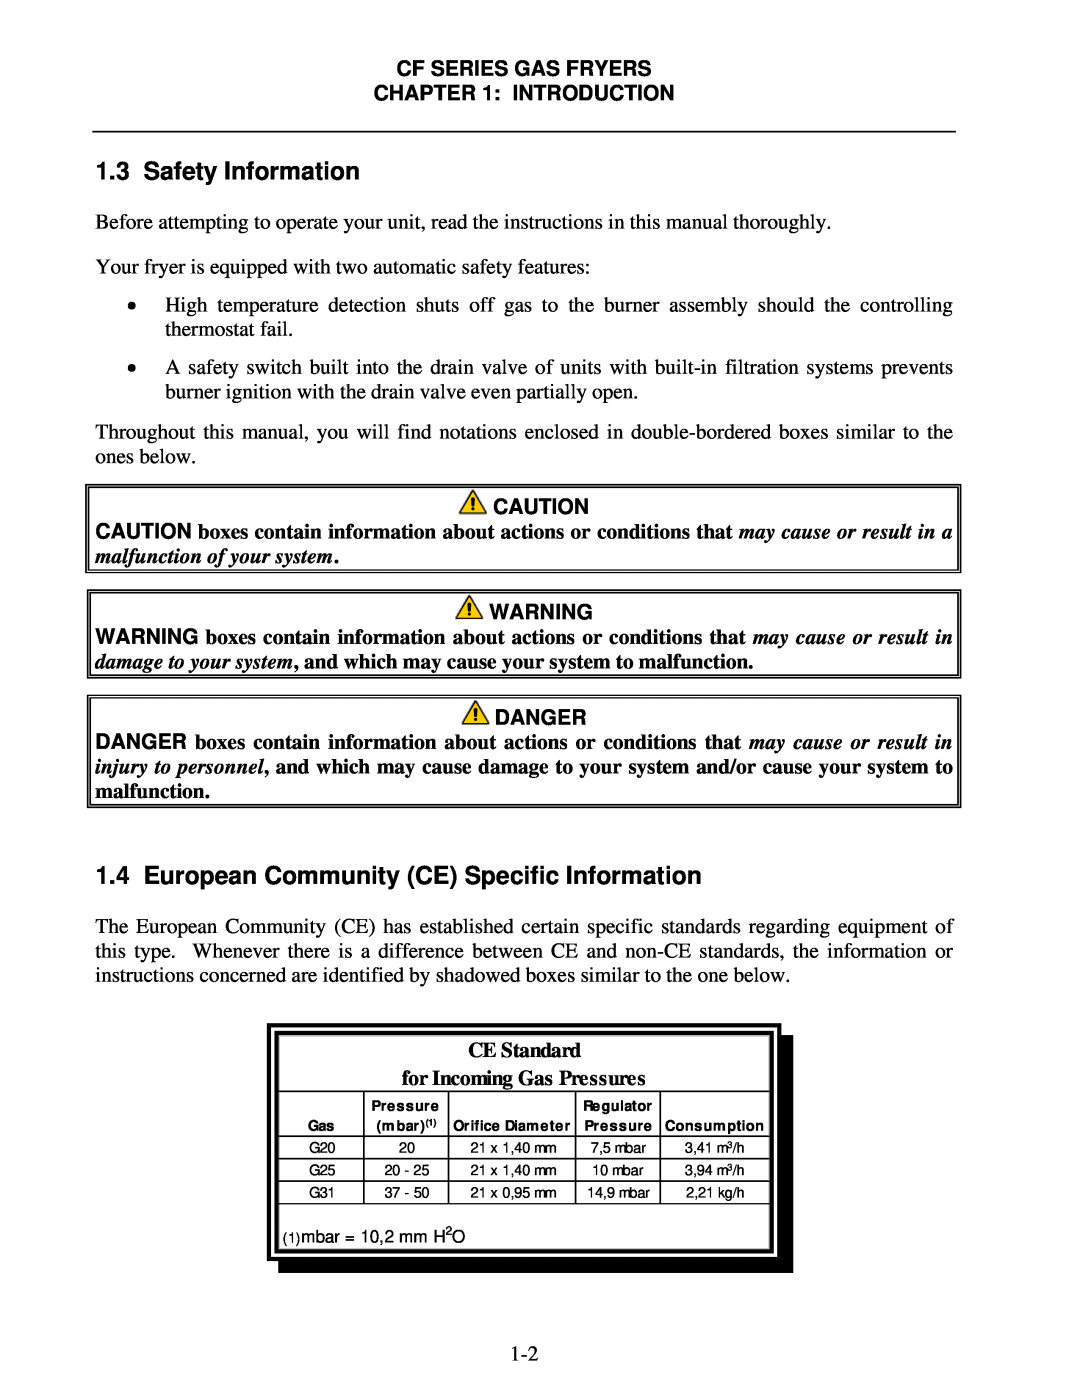 Frymaster FMCF Safety Information, European Community CE Specific Information, CE Standard for Incoming Gas Pressures 